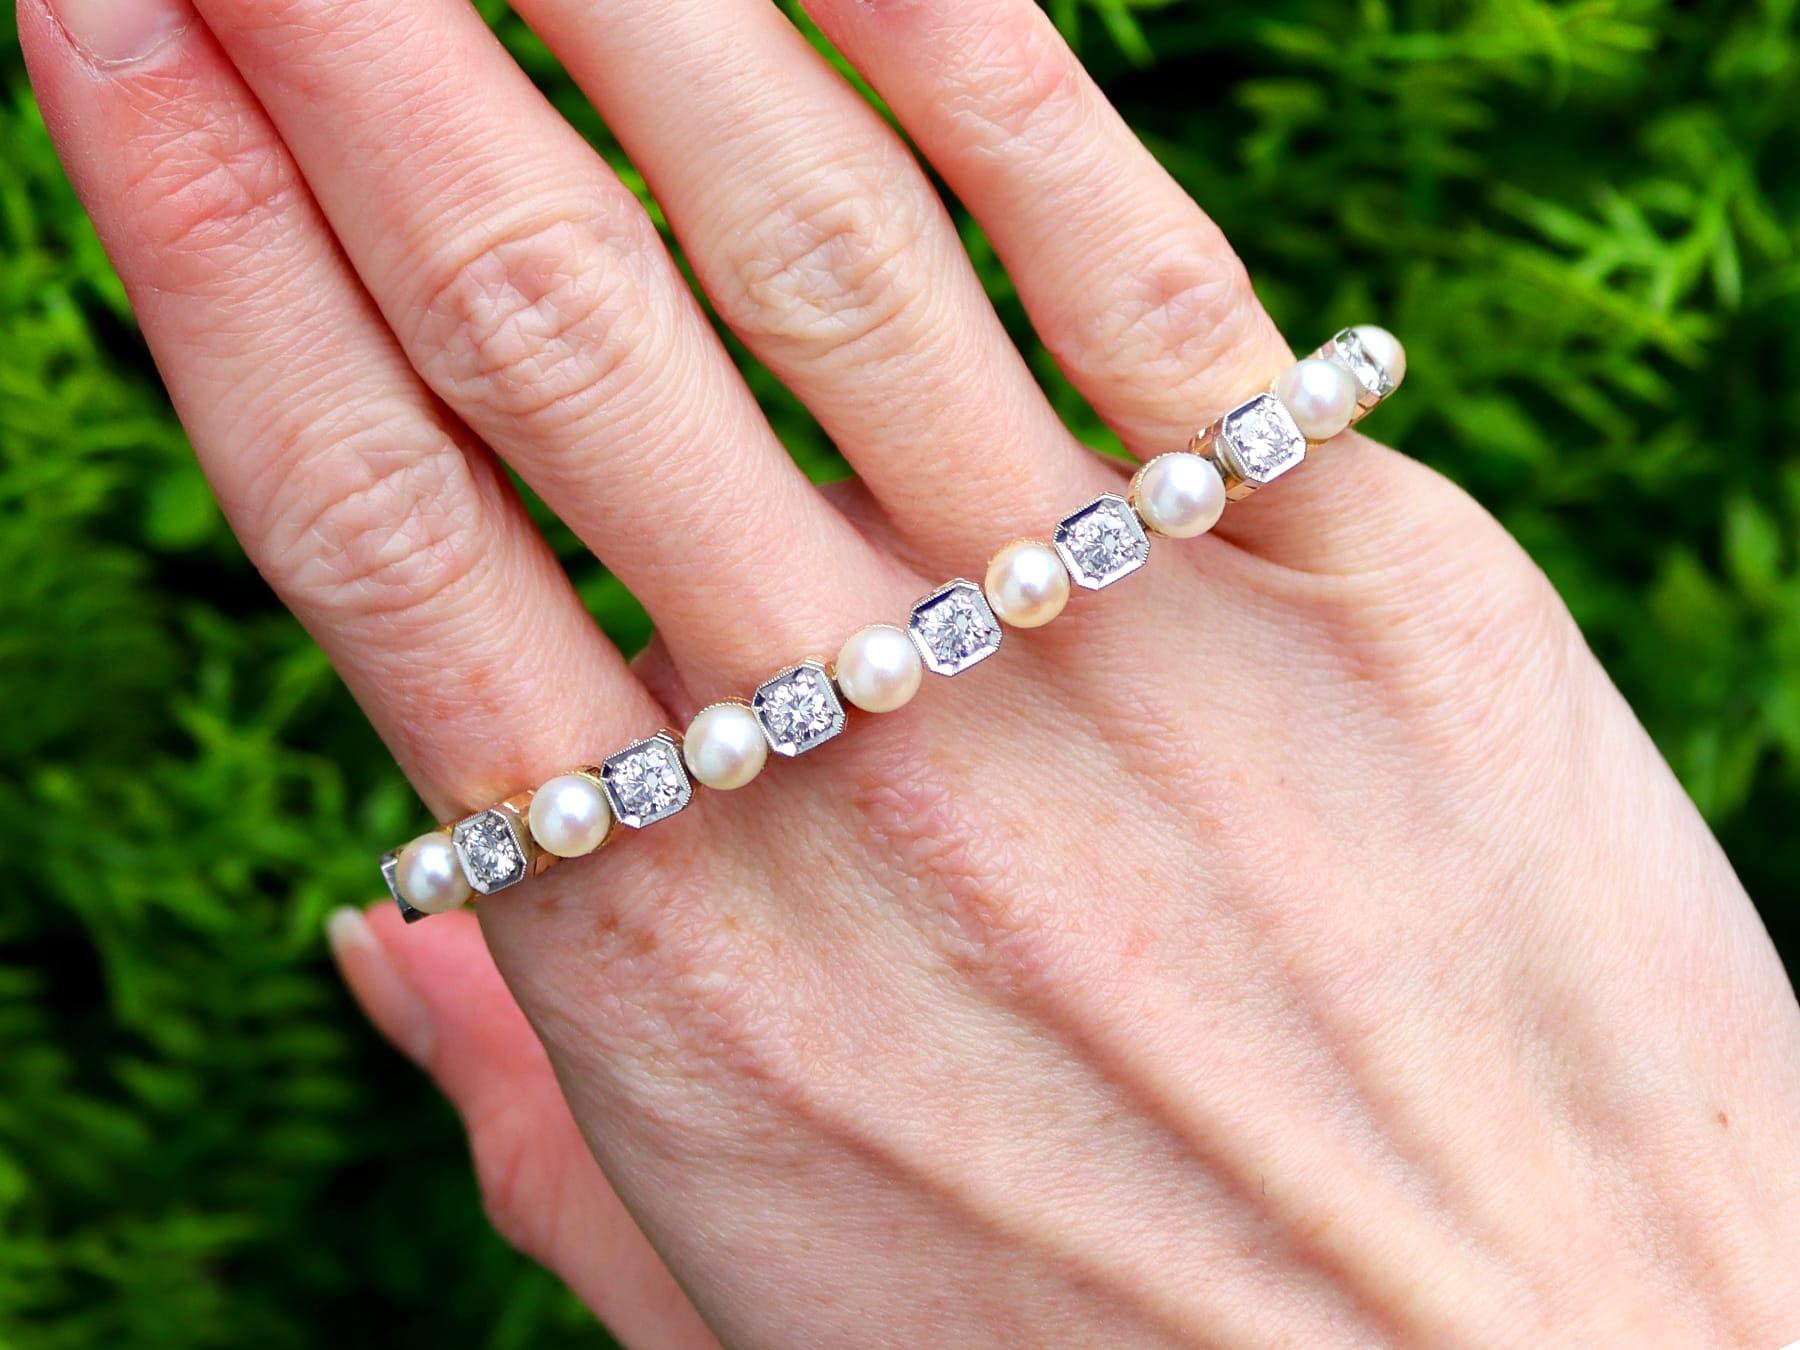 A stunning, fine and impressive antique pearl and 3.30 carat diamond, 14 karat yellow gold and 14 karat white gold set line bracelet; part of our diverse antique pearl jewellery collections

This stunning, fine and impressive antique bracelet has